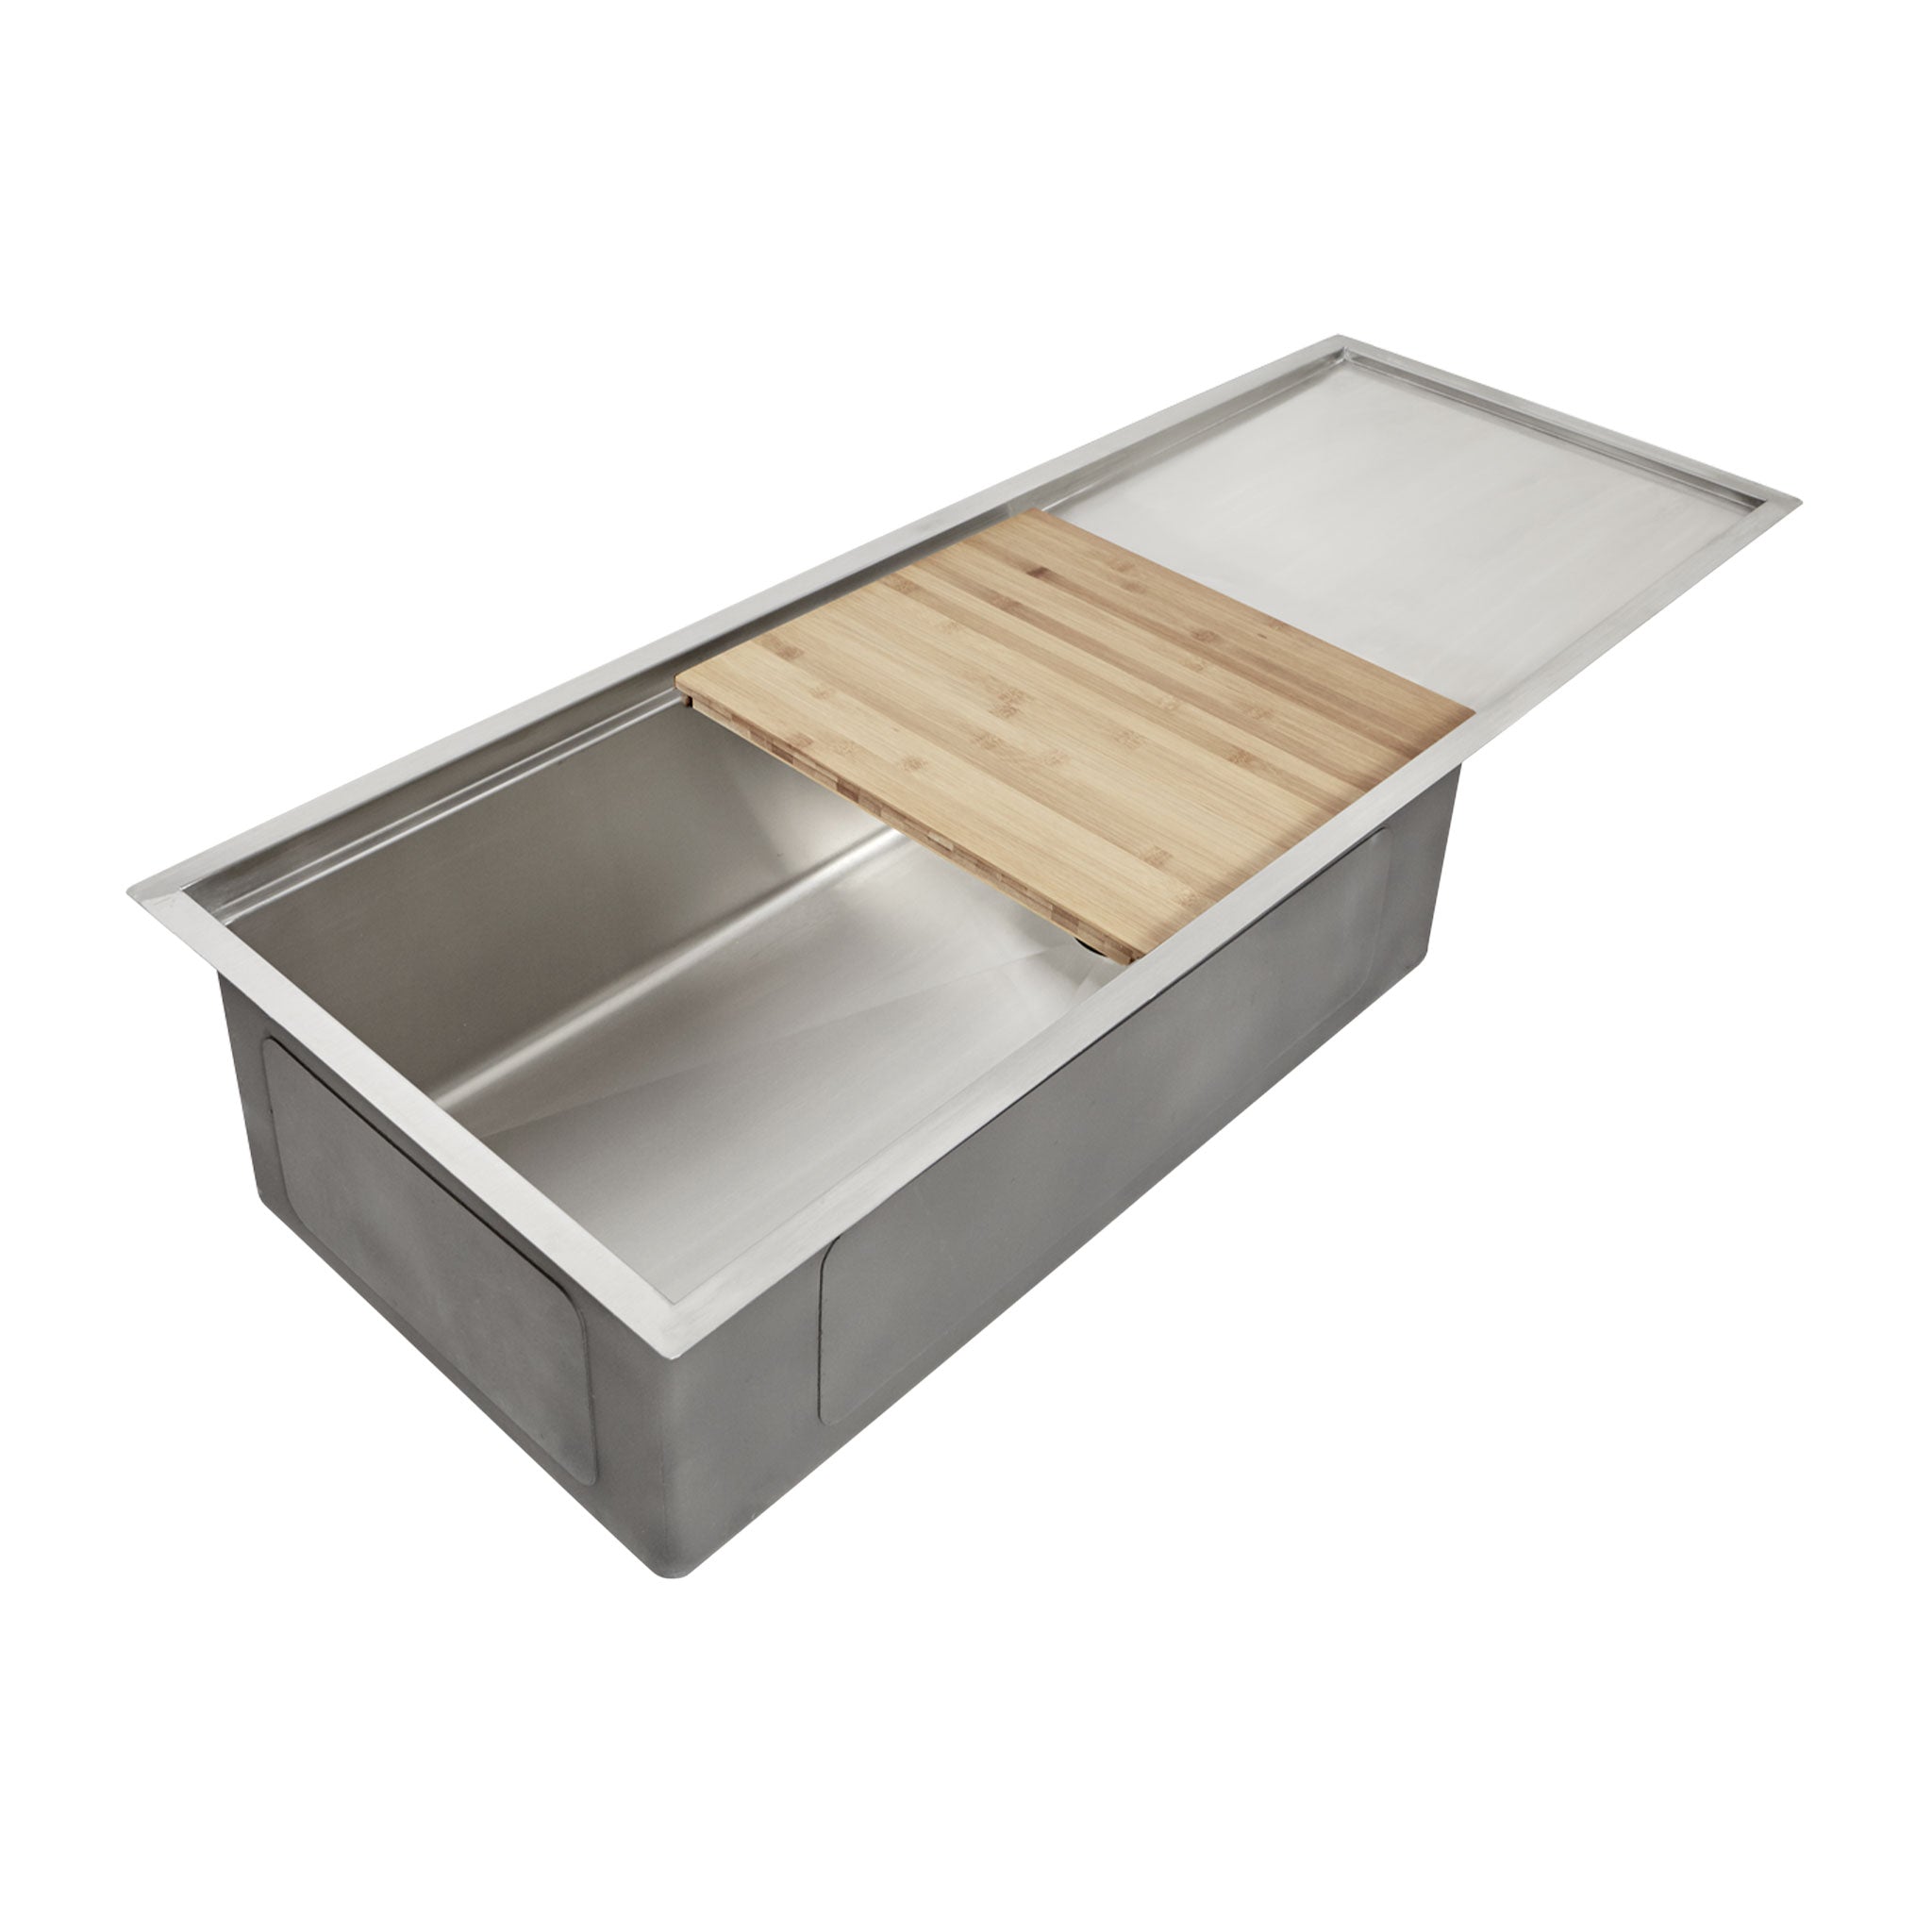 27 inch bowl and 18 inch drainboard stainless steel workstation sink